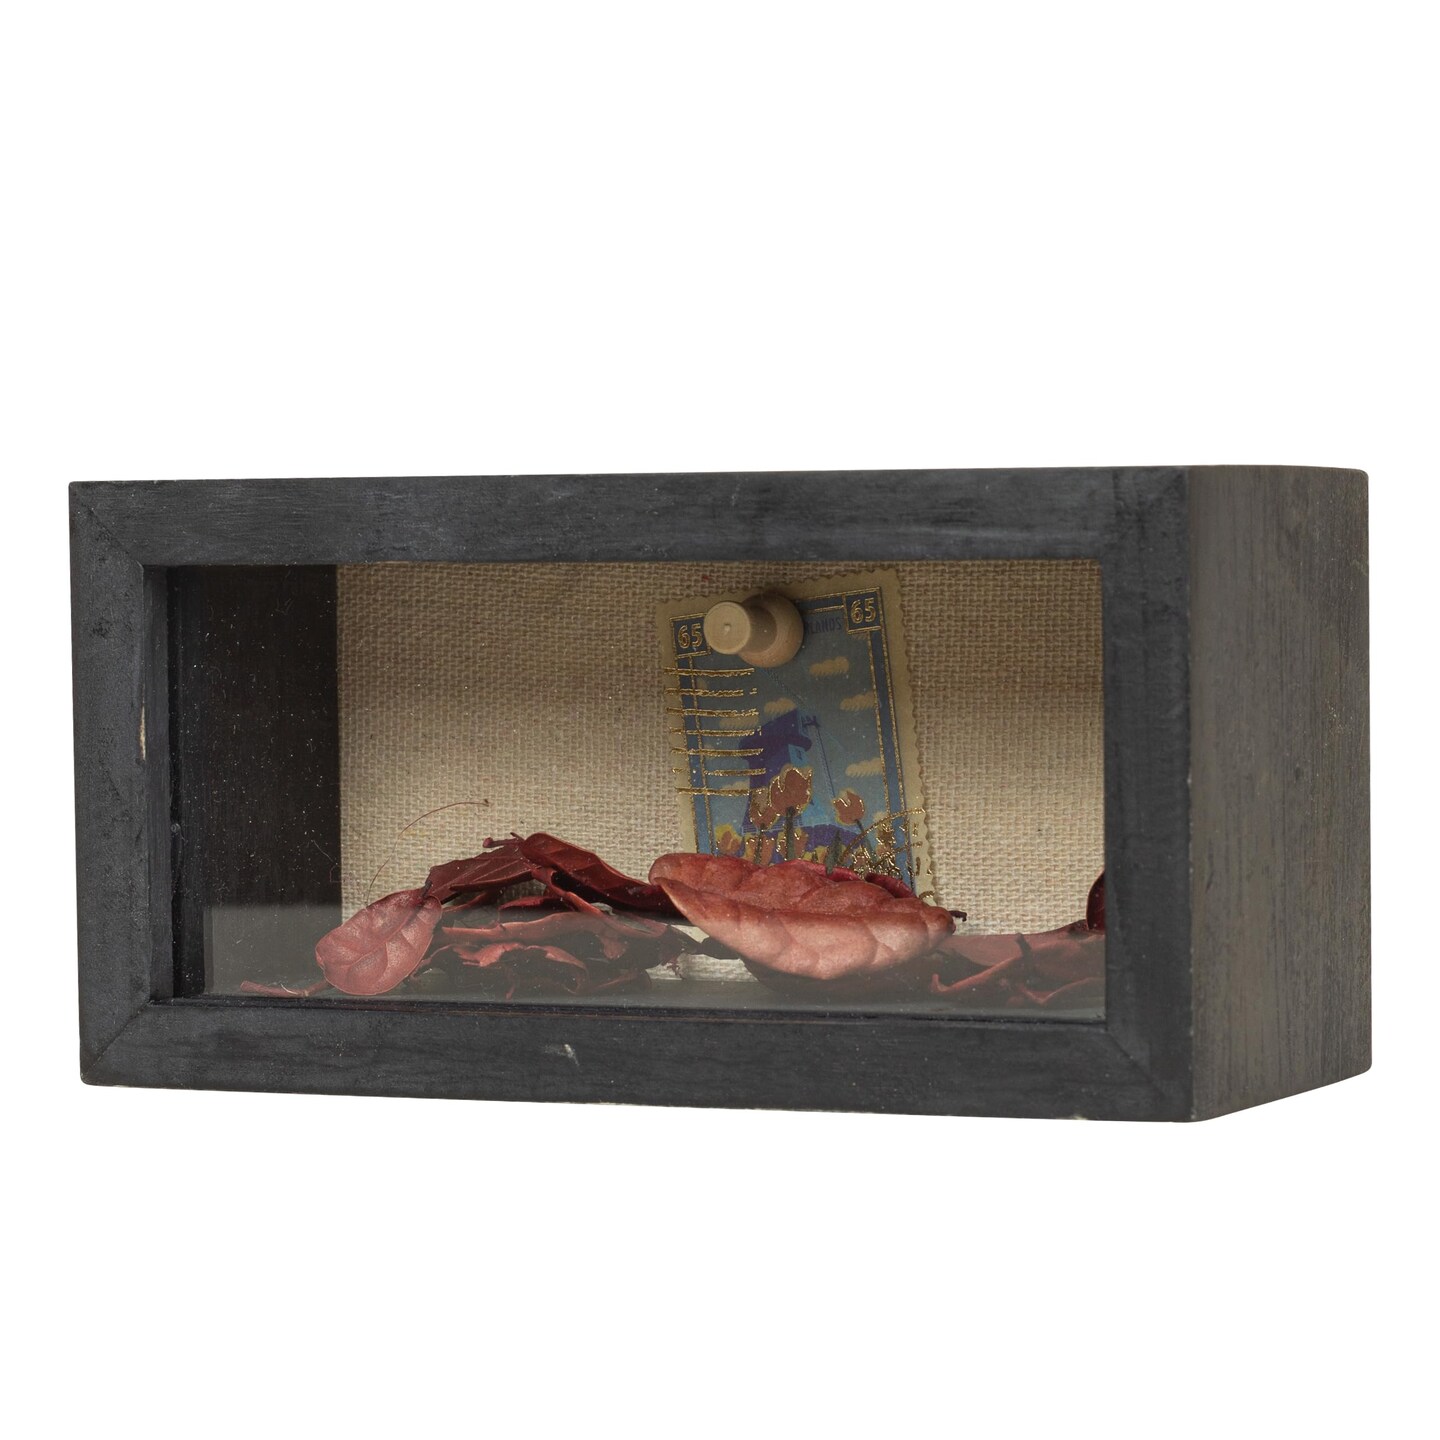 Increased Fire Shadow Box Frame 3x6 Shadow Box Display Case with Linen Back of Awards Memorabilia Flower, Pictures, Keepsakes&#x3001;Bouquet&#x3001;Medals and More Photos Memory Box Black